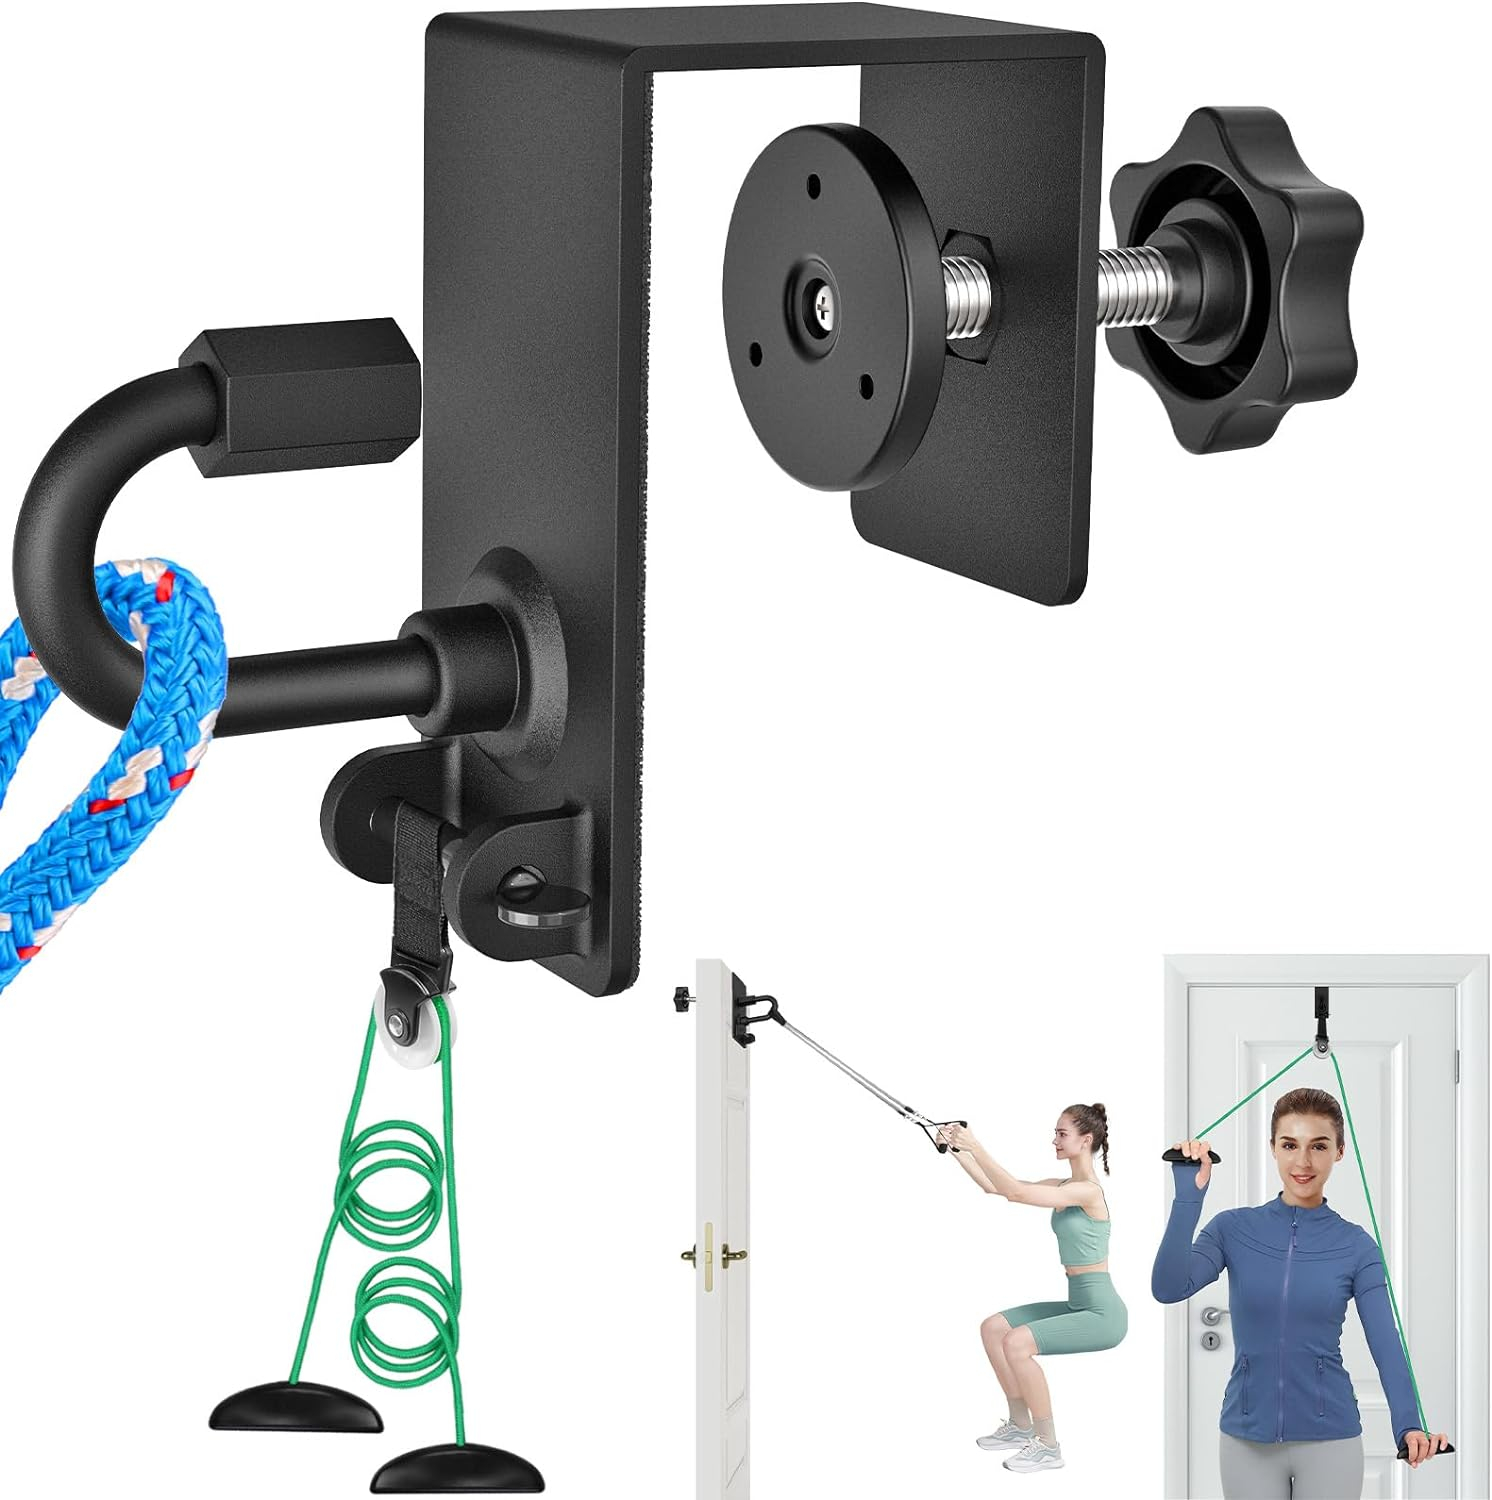 Kipika Heavy Duty Door Anchor Attachment - Shoulder Pulley - Over Door Rehab Exerciser for Rotator Cuff Recovery, Strength Training, Physical Therapy Exercise, Home Gym